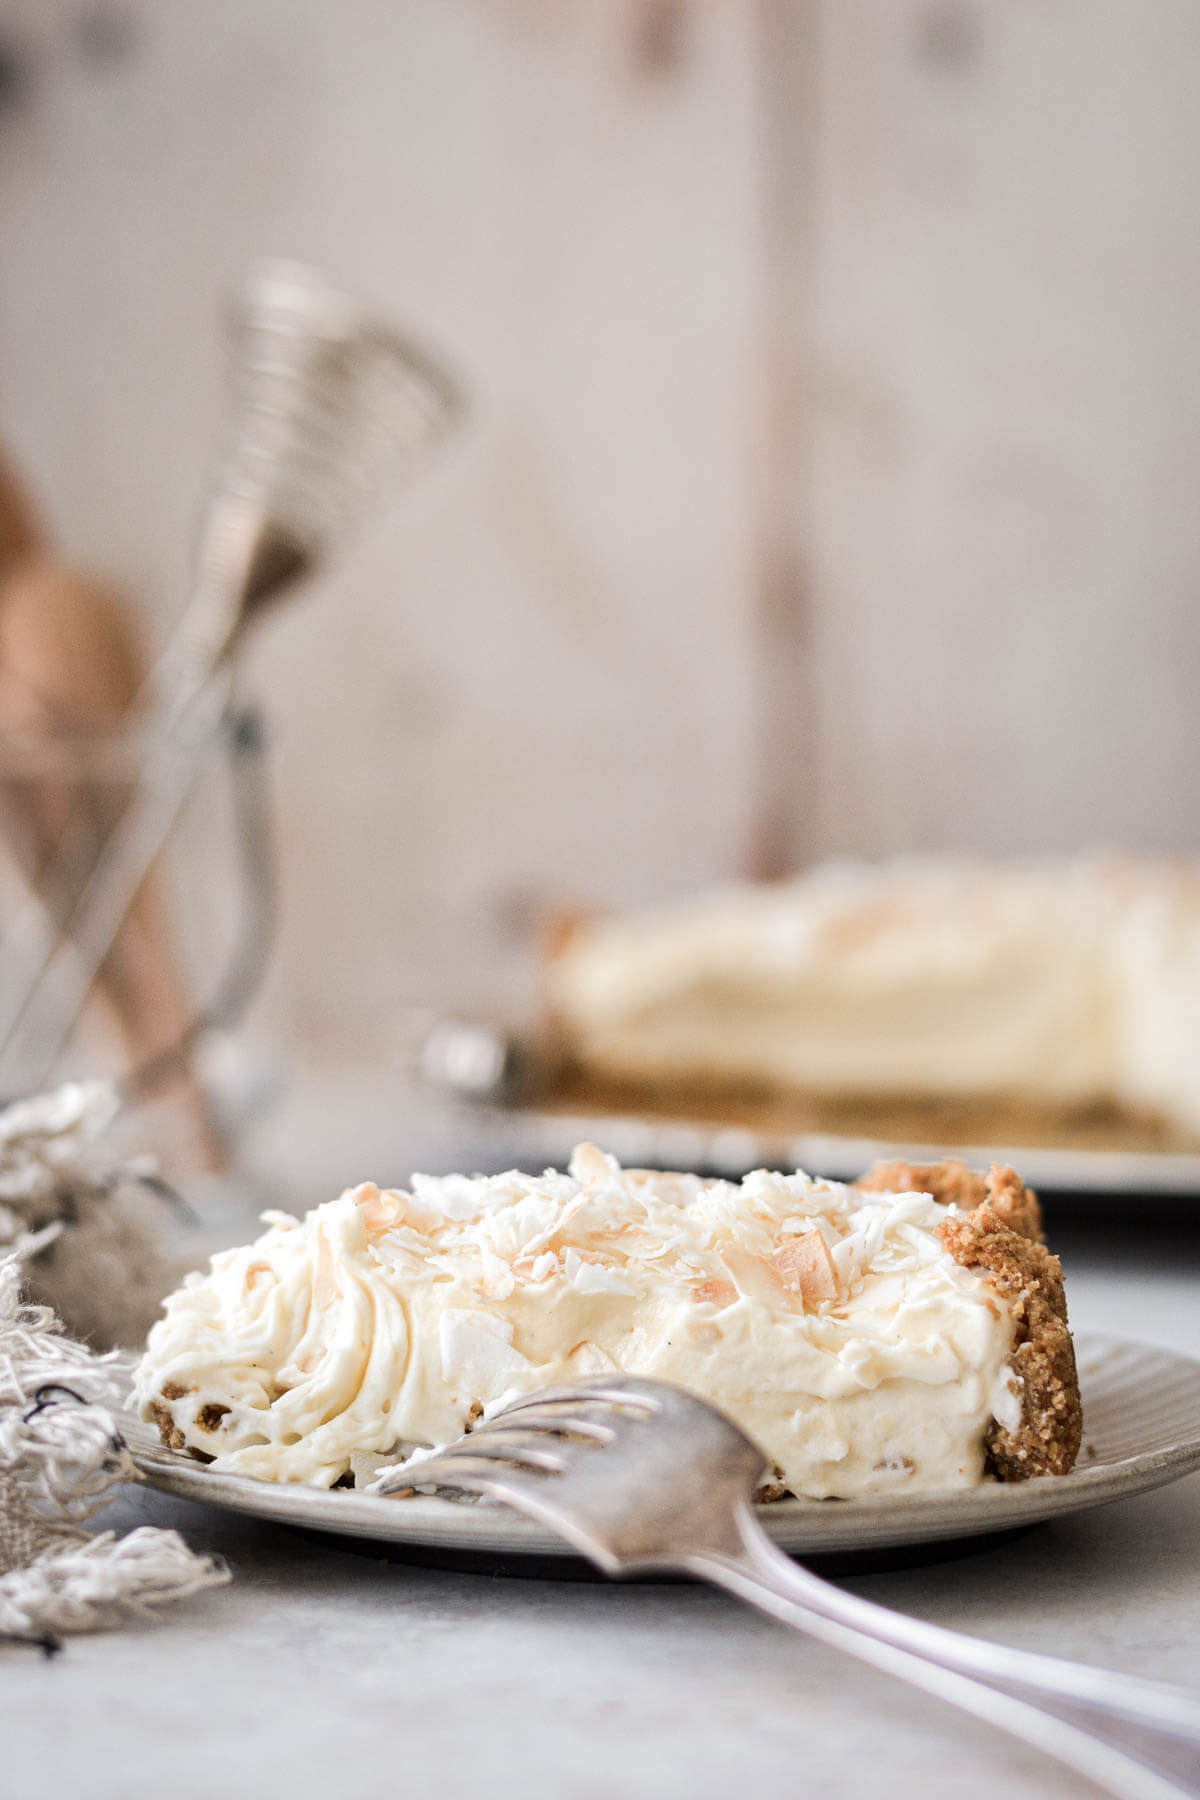 Slice of Bavarian cream pie with toasted coconut on a plate with a silver fork.